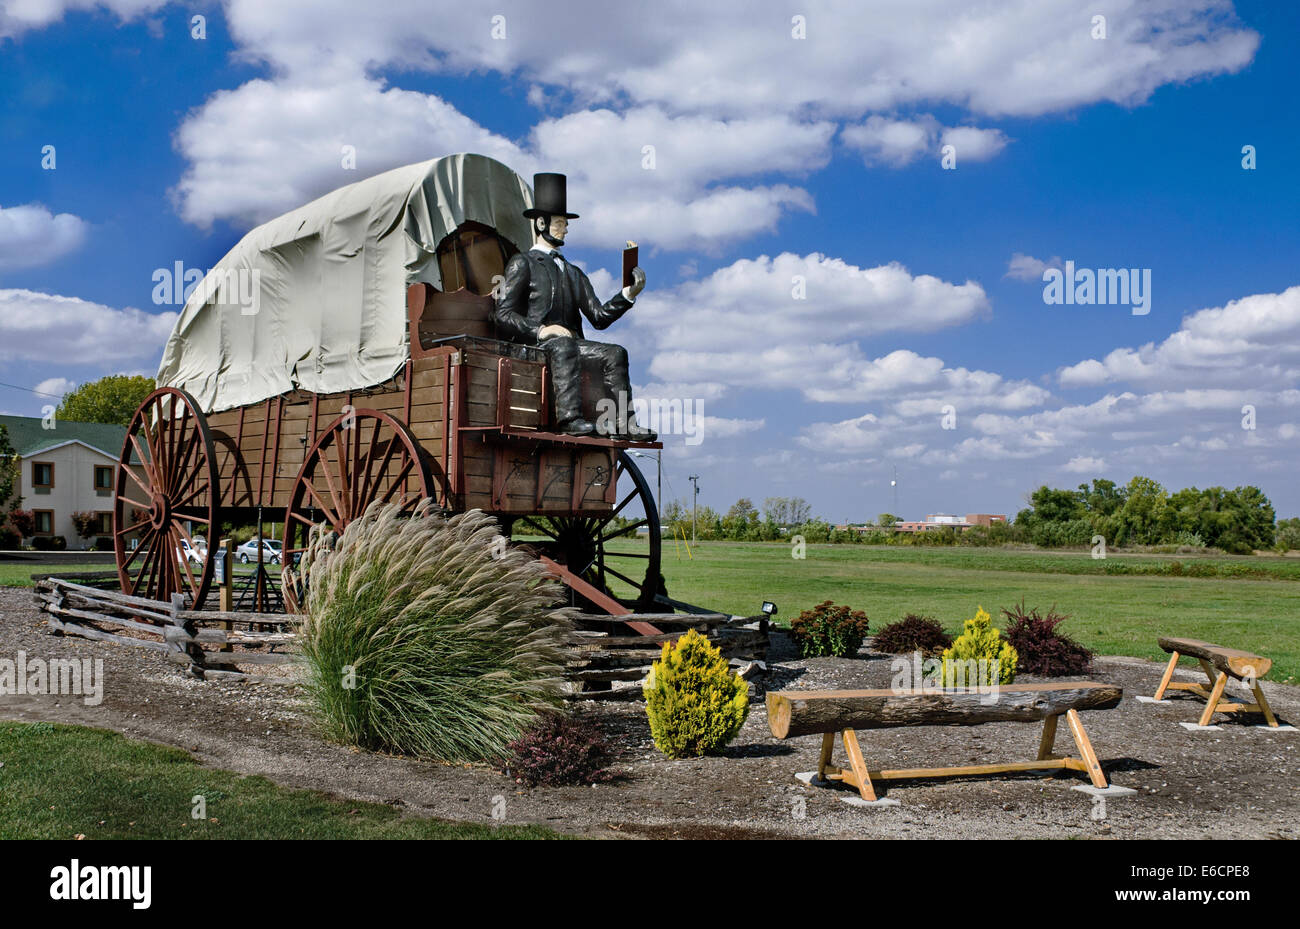 The Railsplitter Covered Wagon features Abraham Lincoln sitting on a covered wagon reading a book. Stock Photo